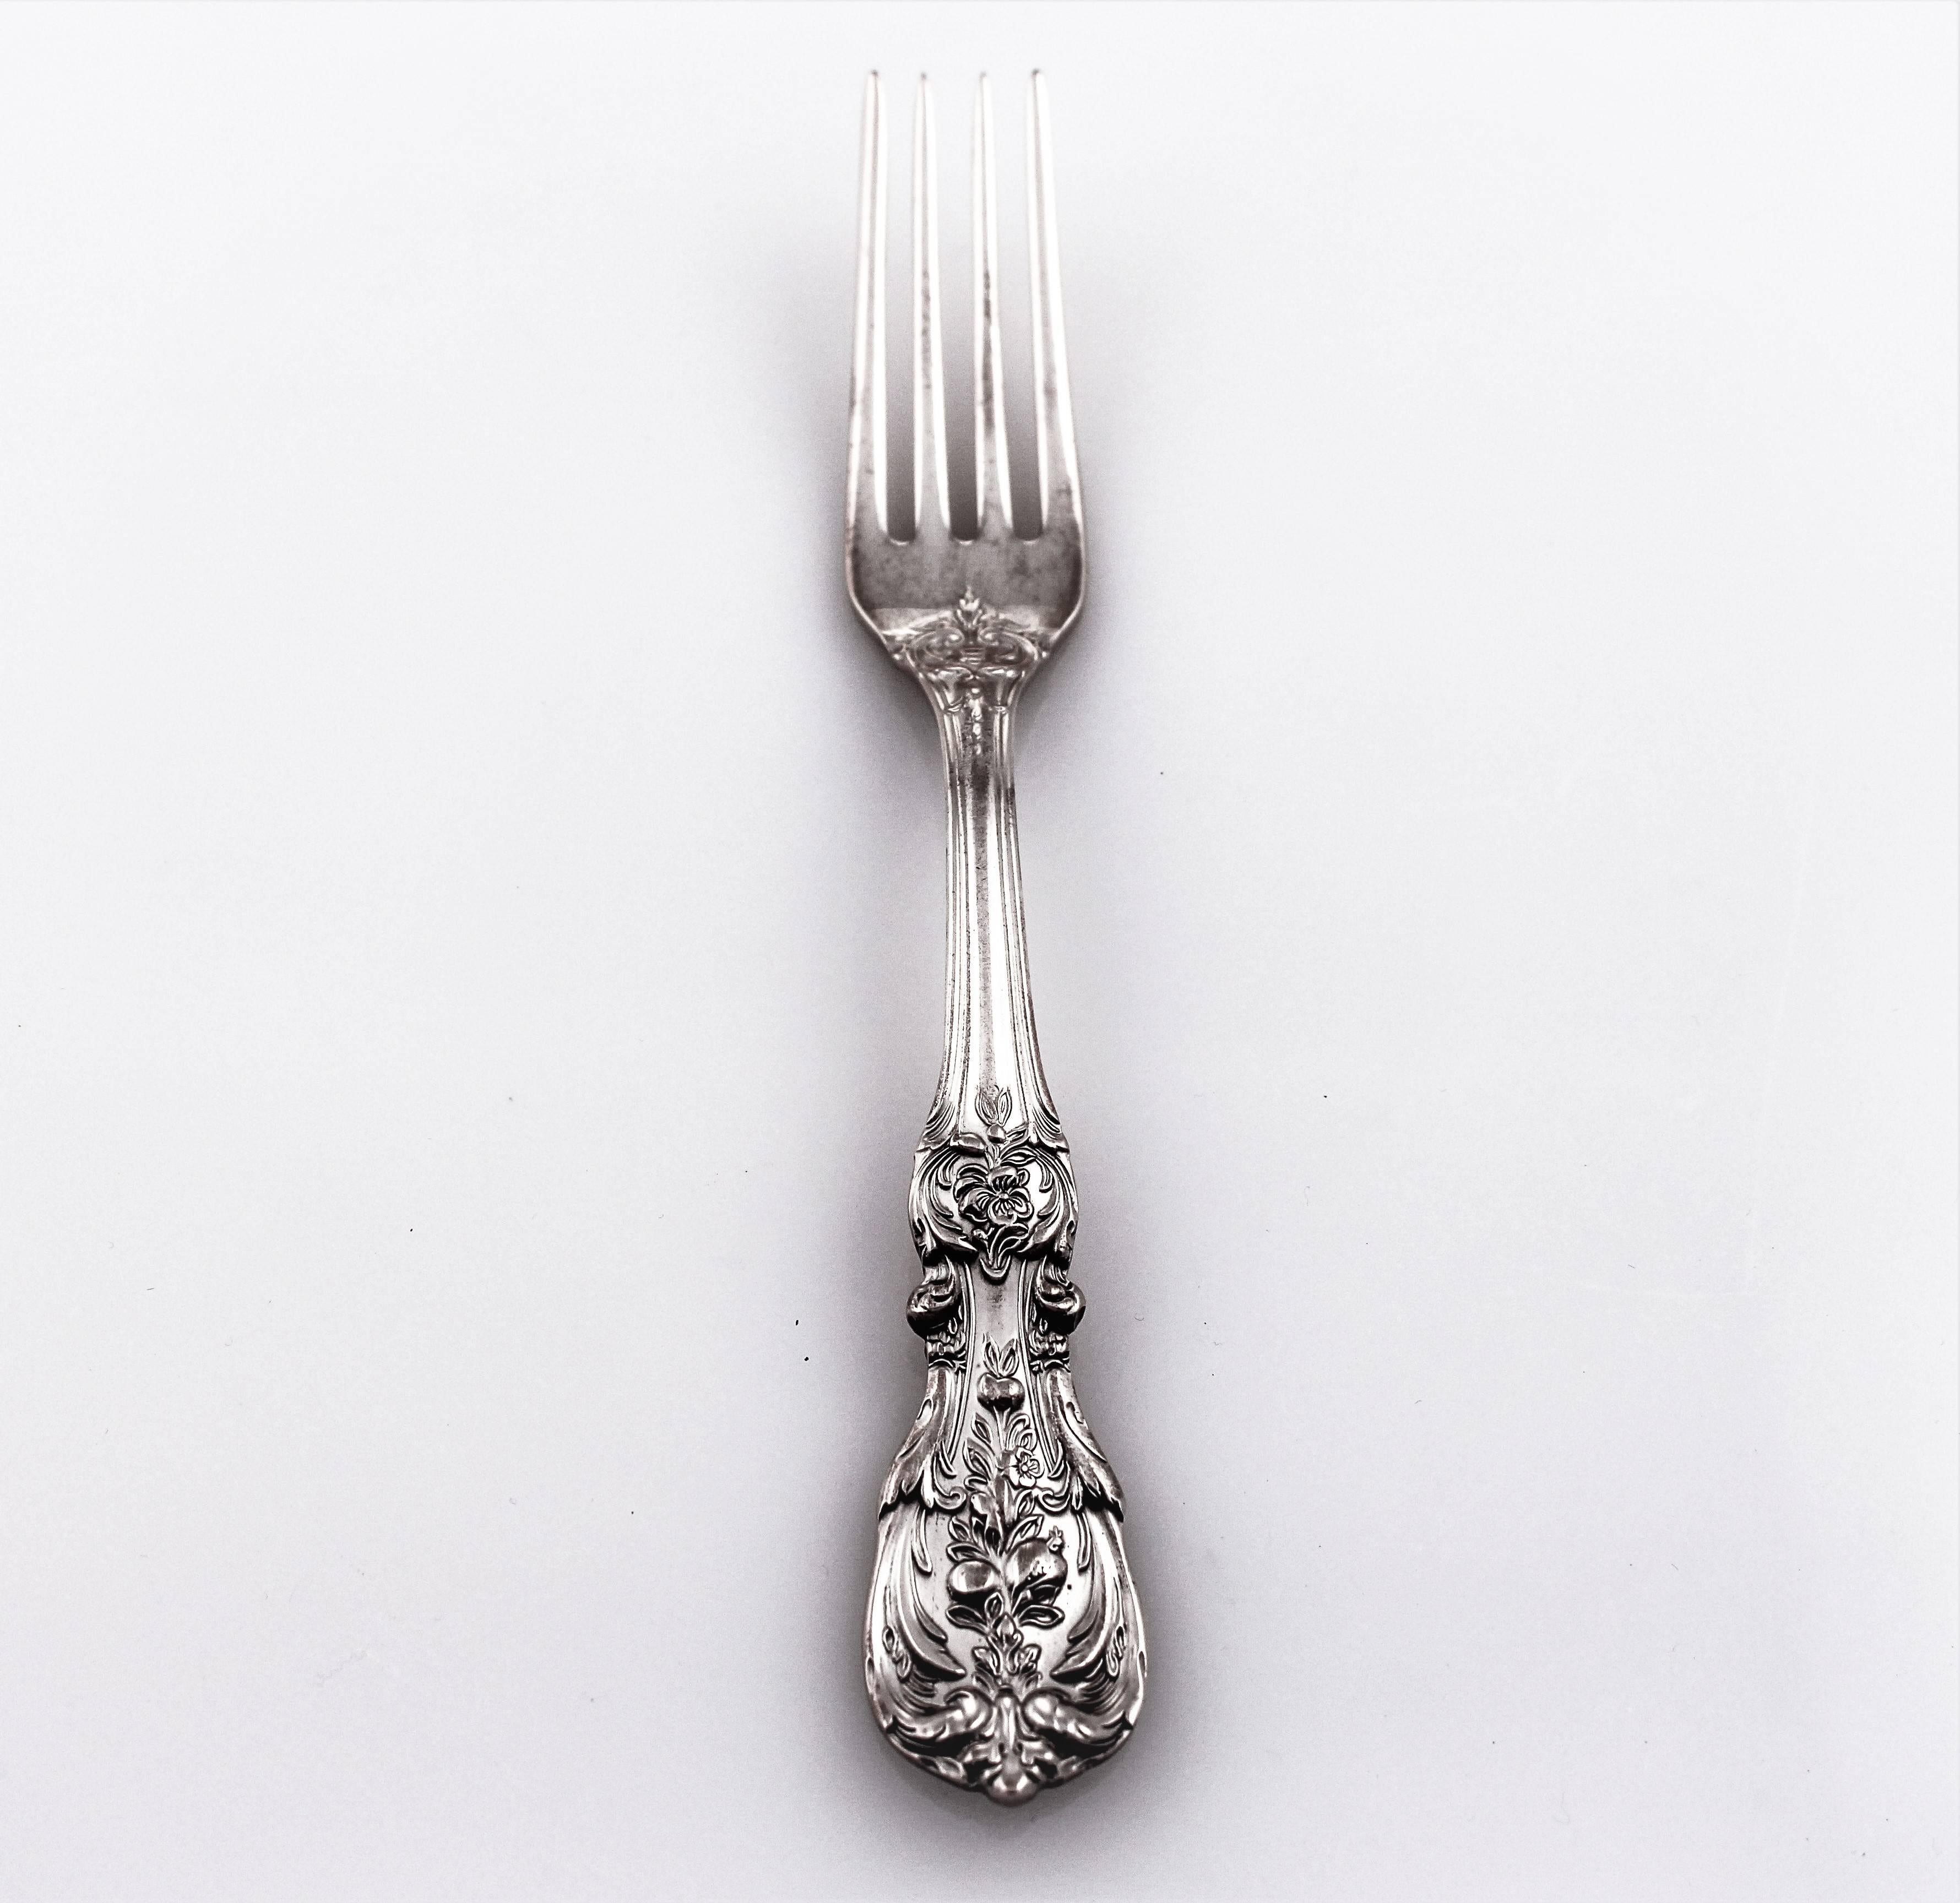 The famous Francis I by Reed and Barton! This pattern is considered one of the finest sterling patterns of all times. The beauty and quality is legendary. The cluster of fruit in the centre, surrounded by wreaths and flowers. American craftsmanship